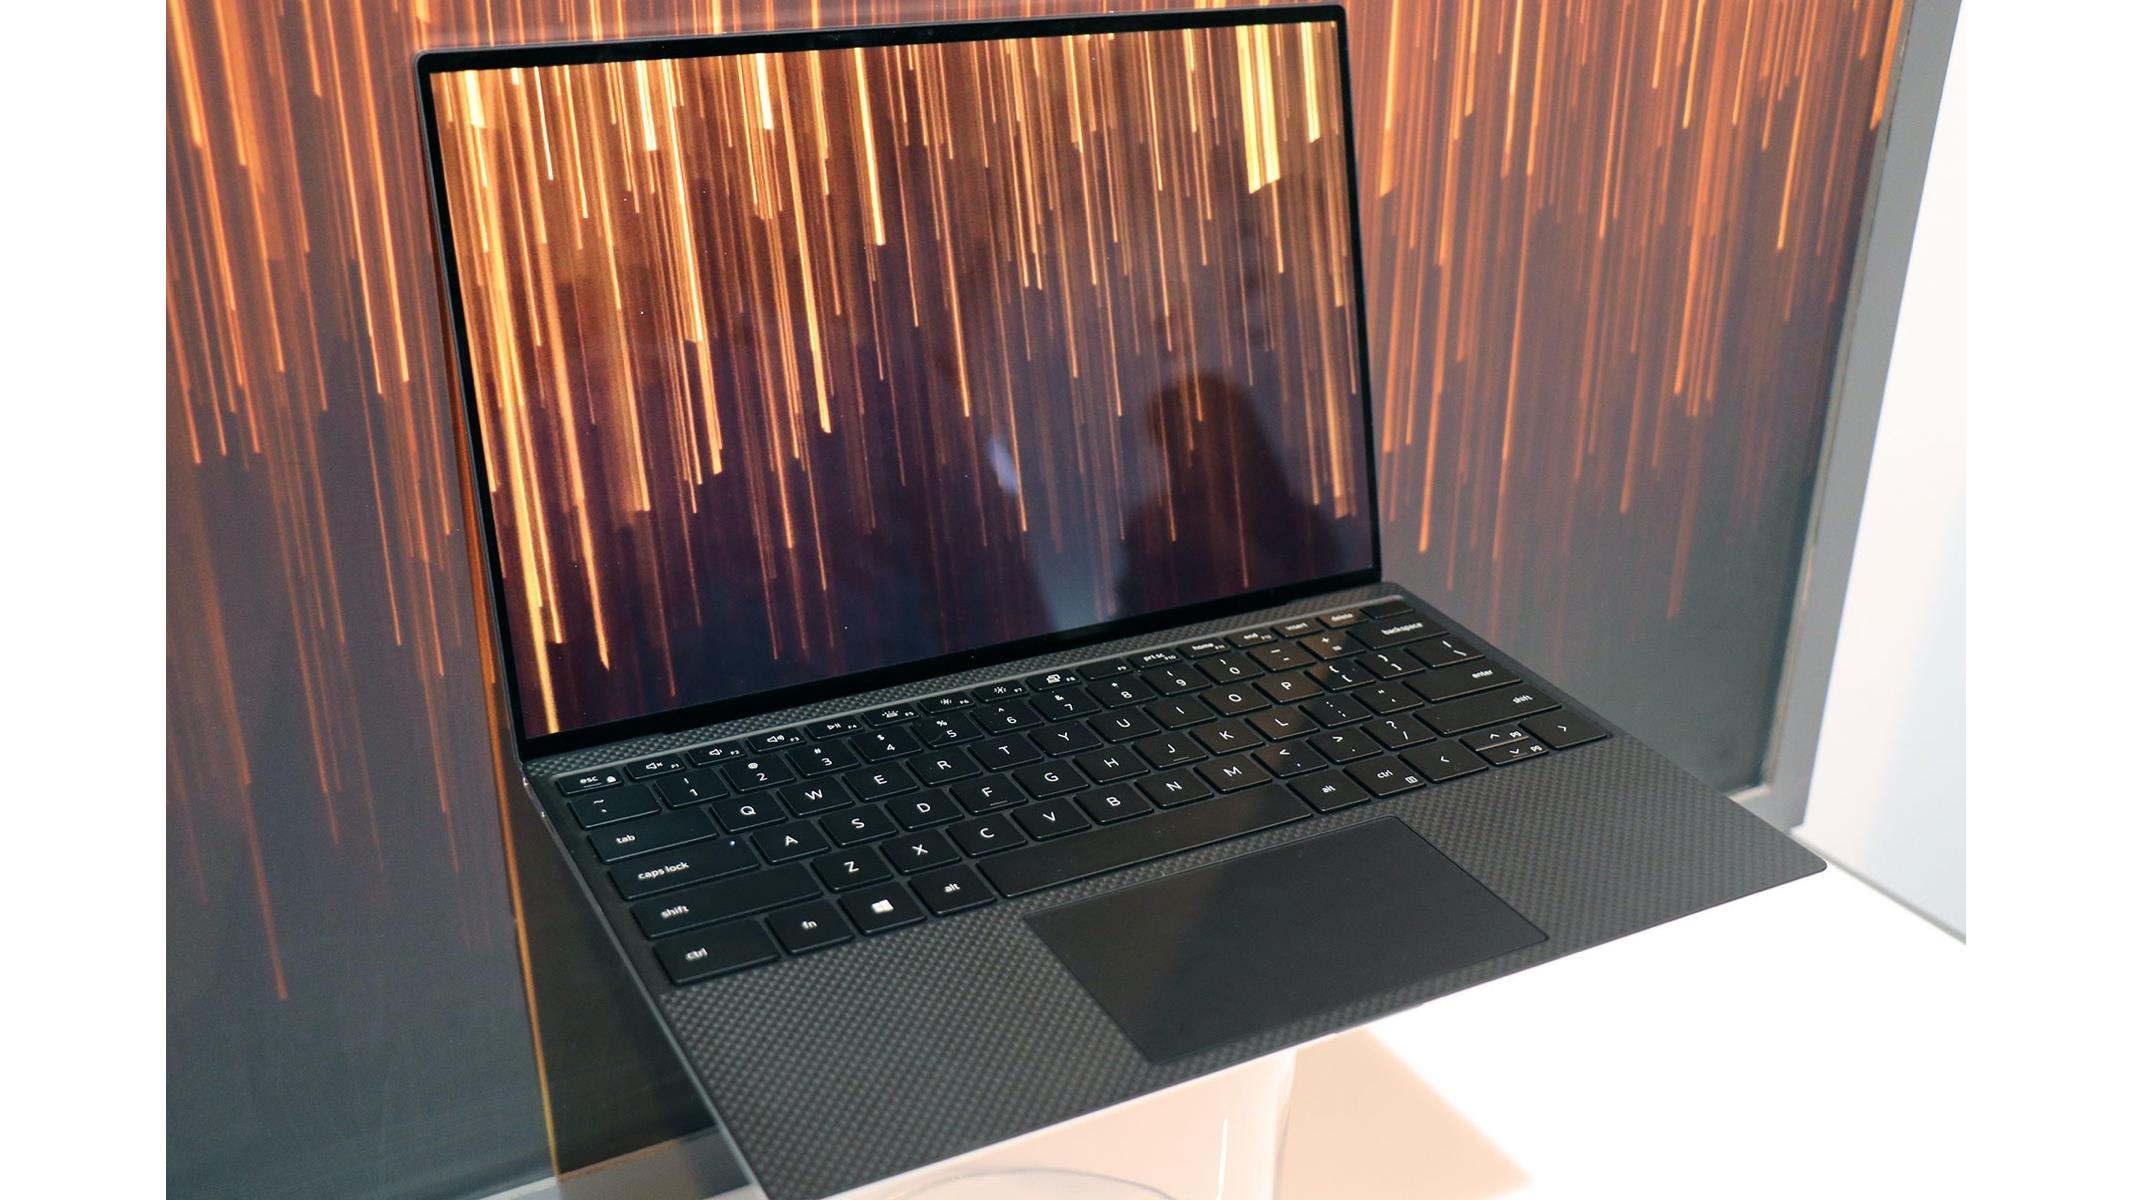 Hands On Dell S Xps 13 Edition Featuring Four Sided Infinityedge Display And Ice Lake Cpus Hothardware